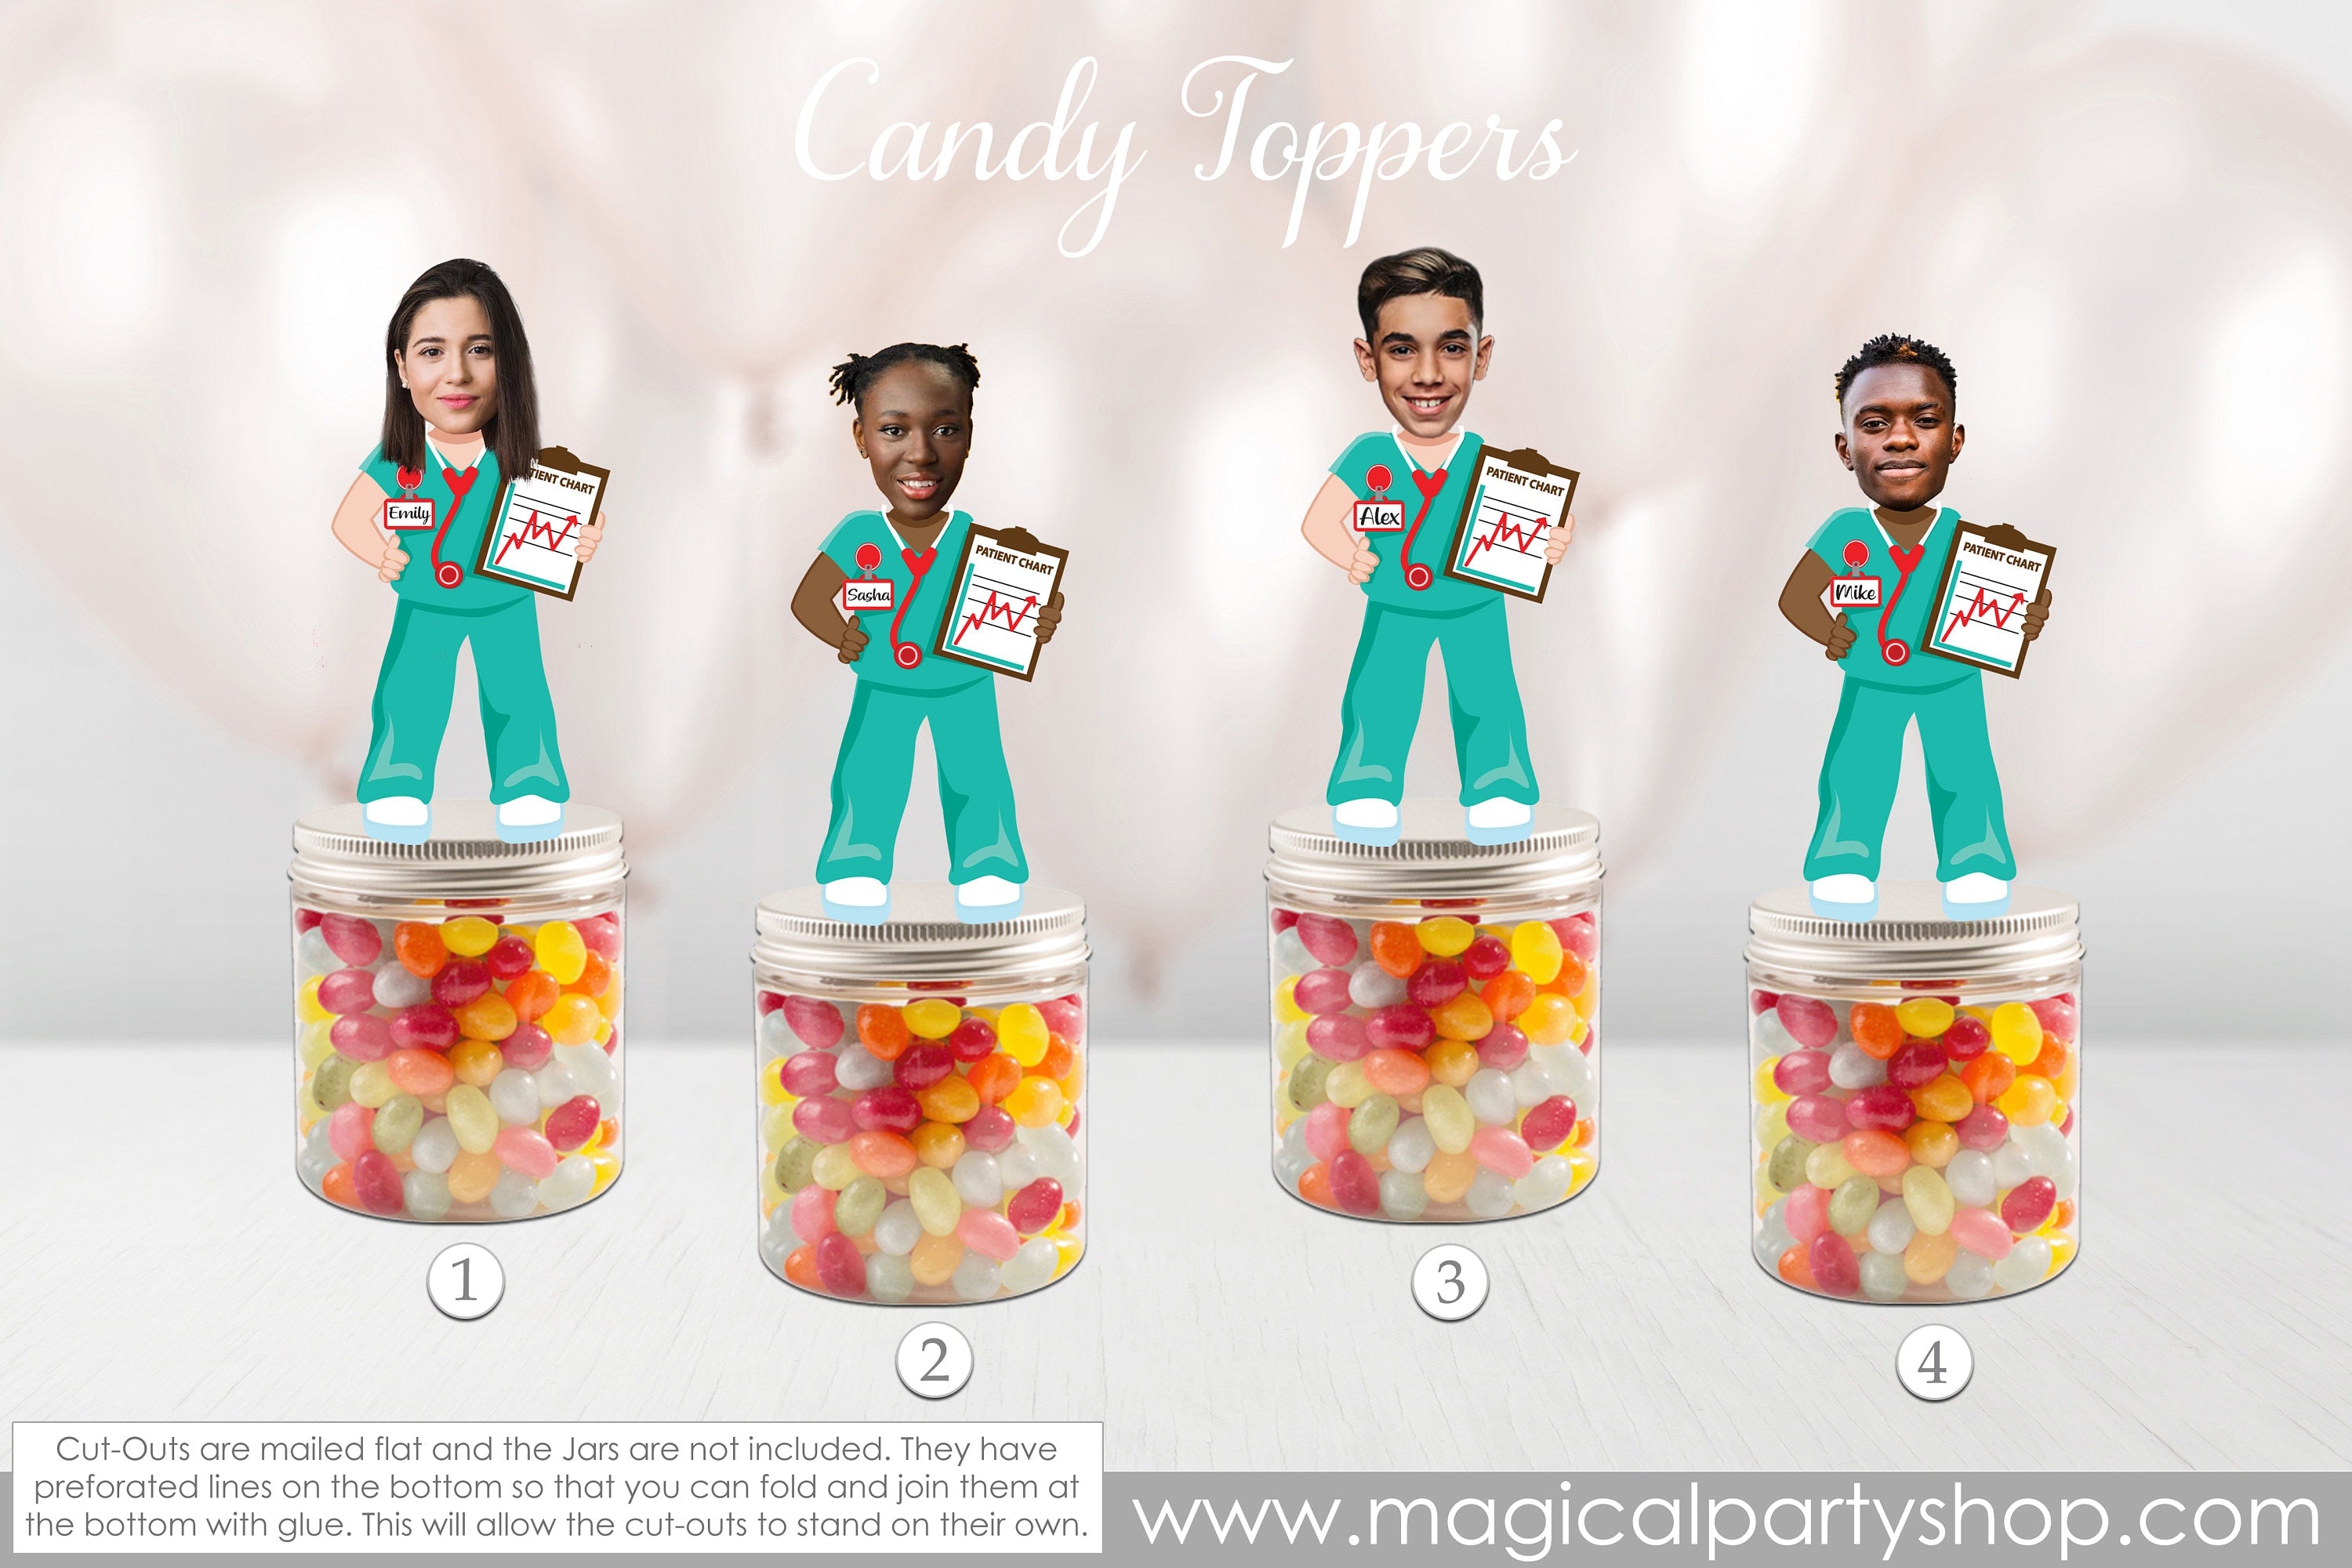 Nurses and Doctors Party Favor Toppers | Nurse Party Decorations | Candy toppers | Candy Buffet |  Nursing School Graduate | Retirement